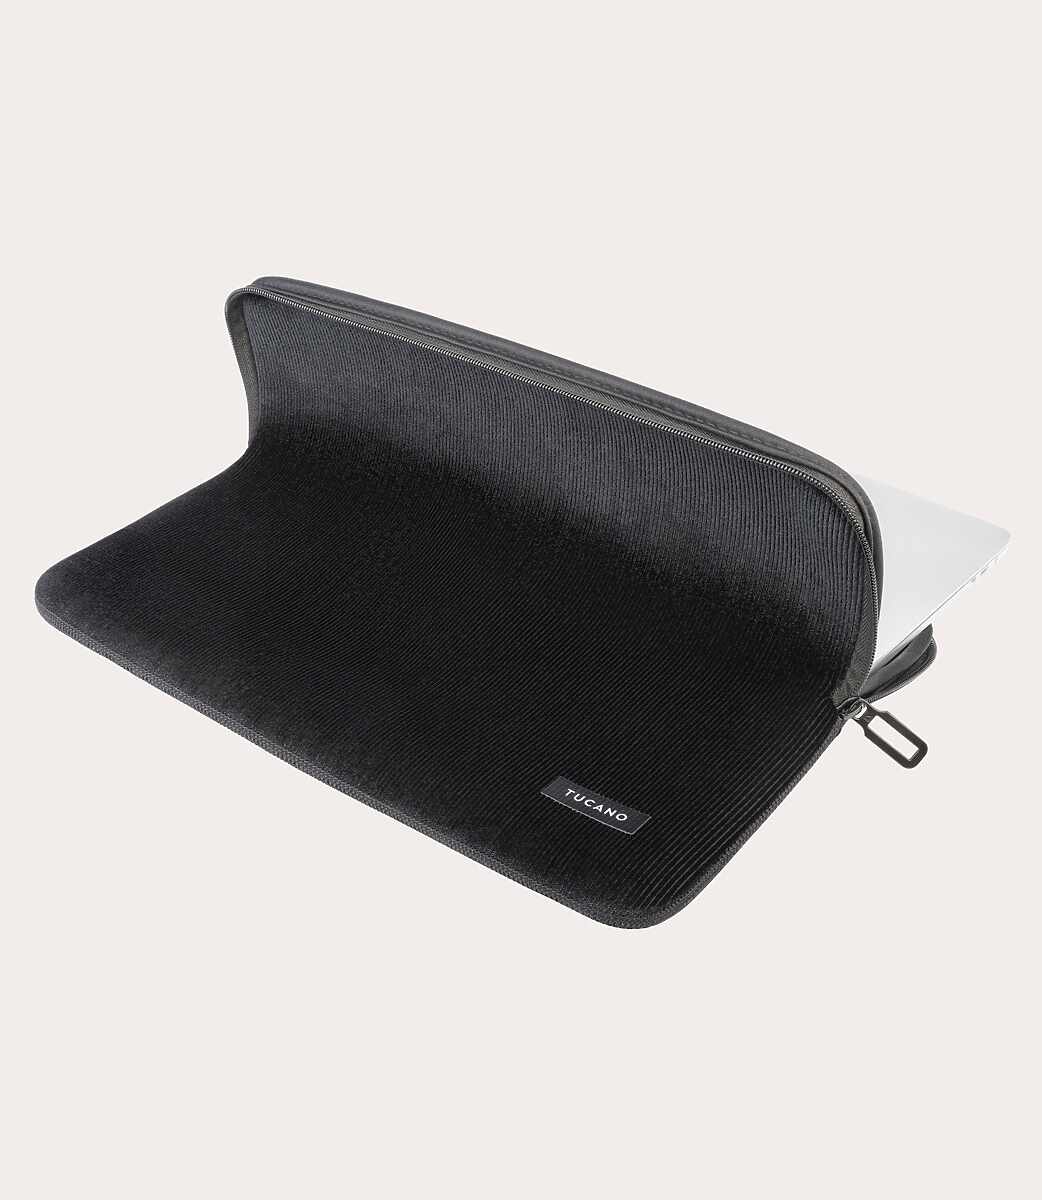 Tucano Velluto Sleeve for laptops up to 13in